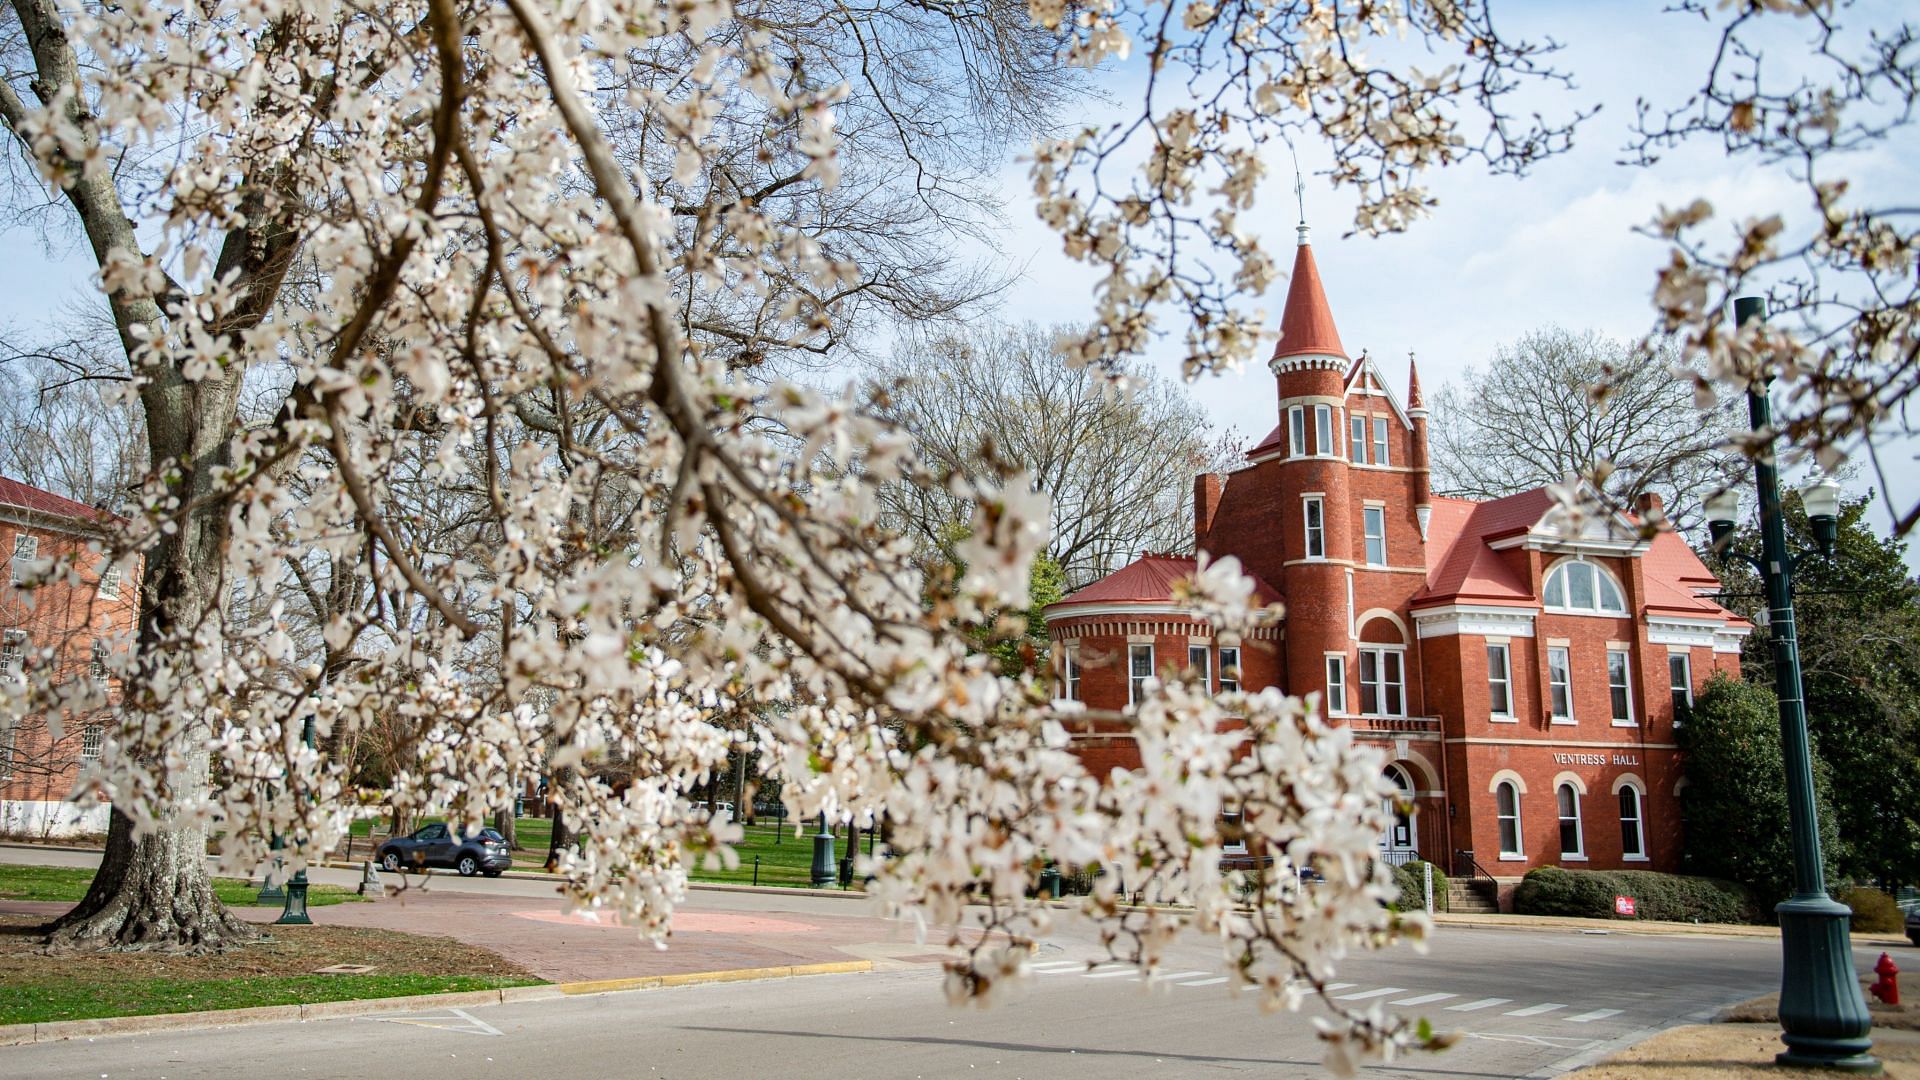 The Ole Miss Campus (Picture source: @OleMiss (X))